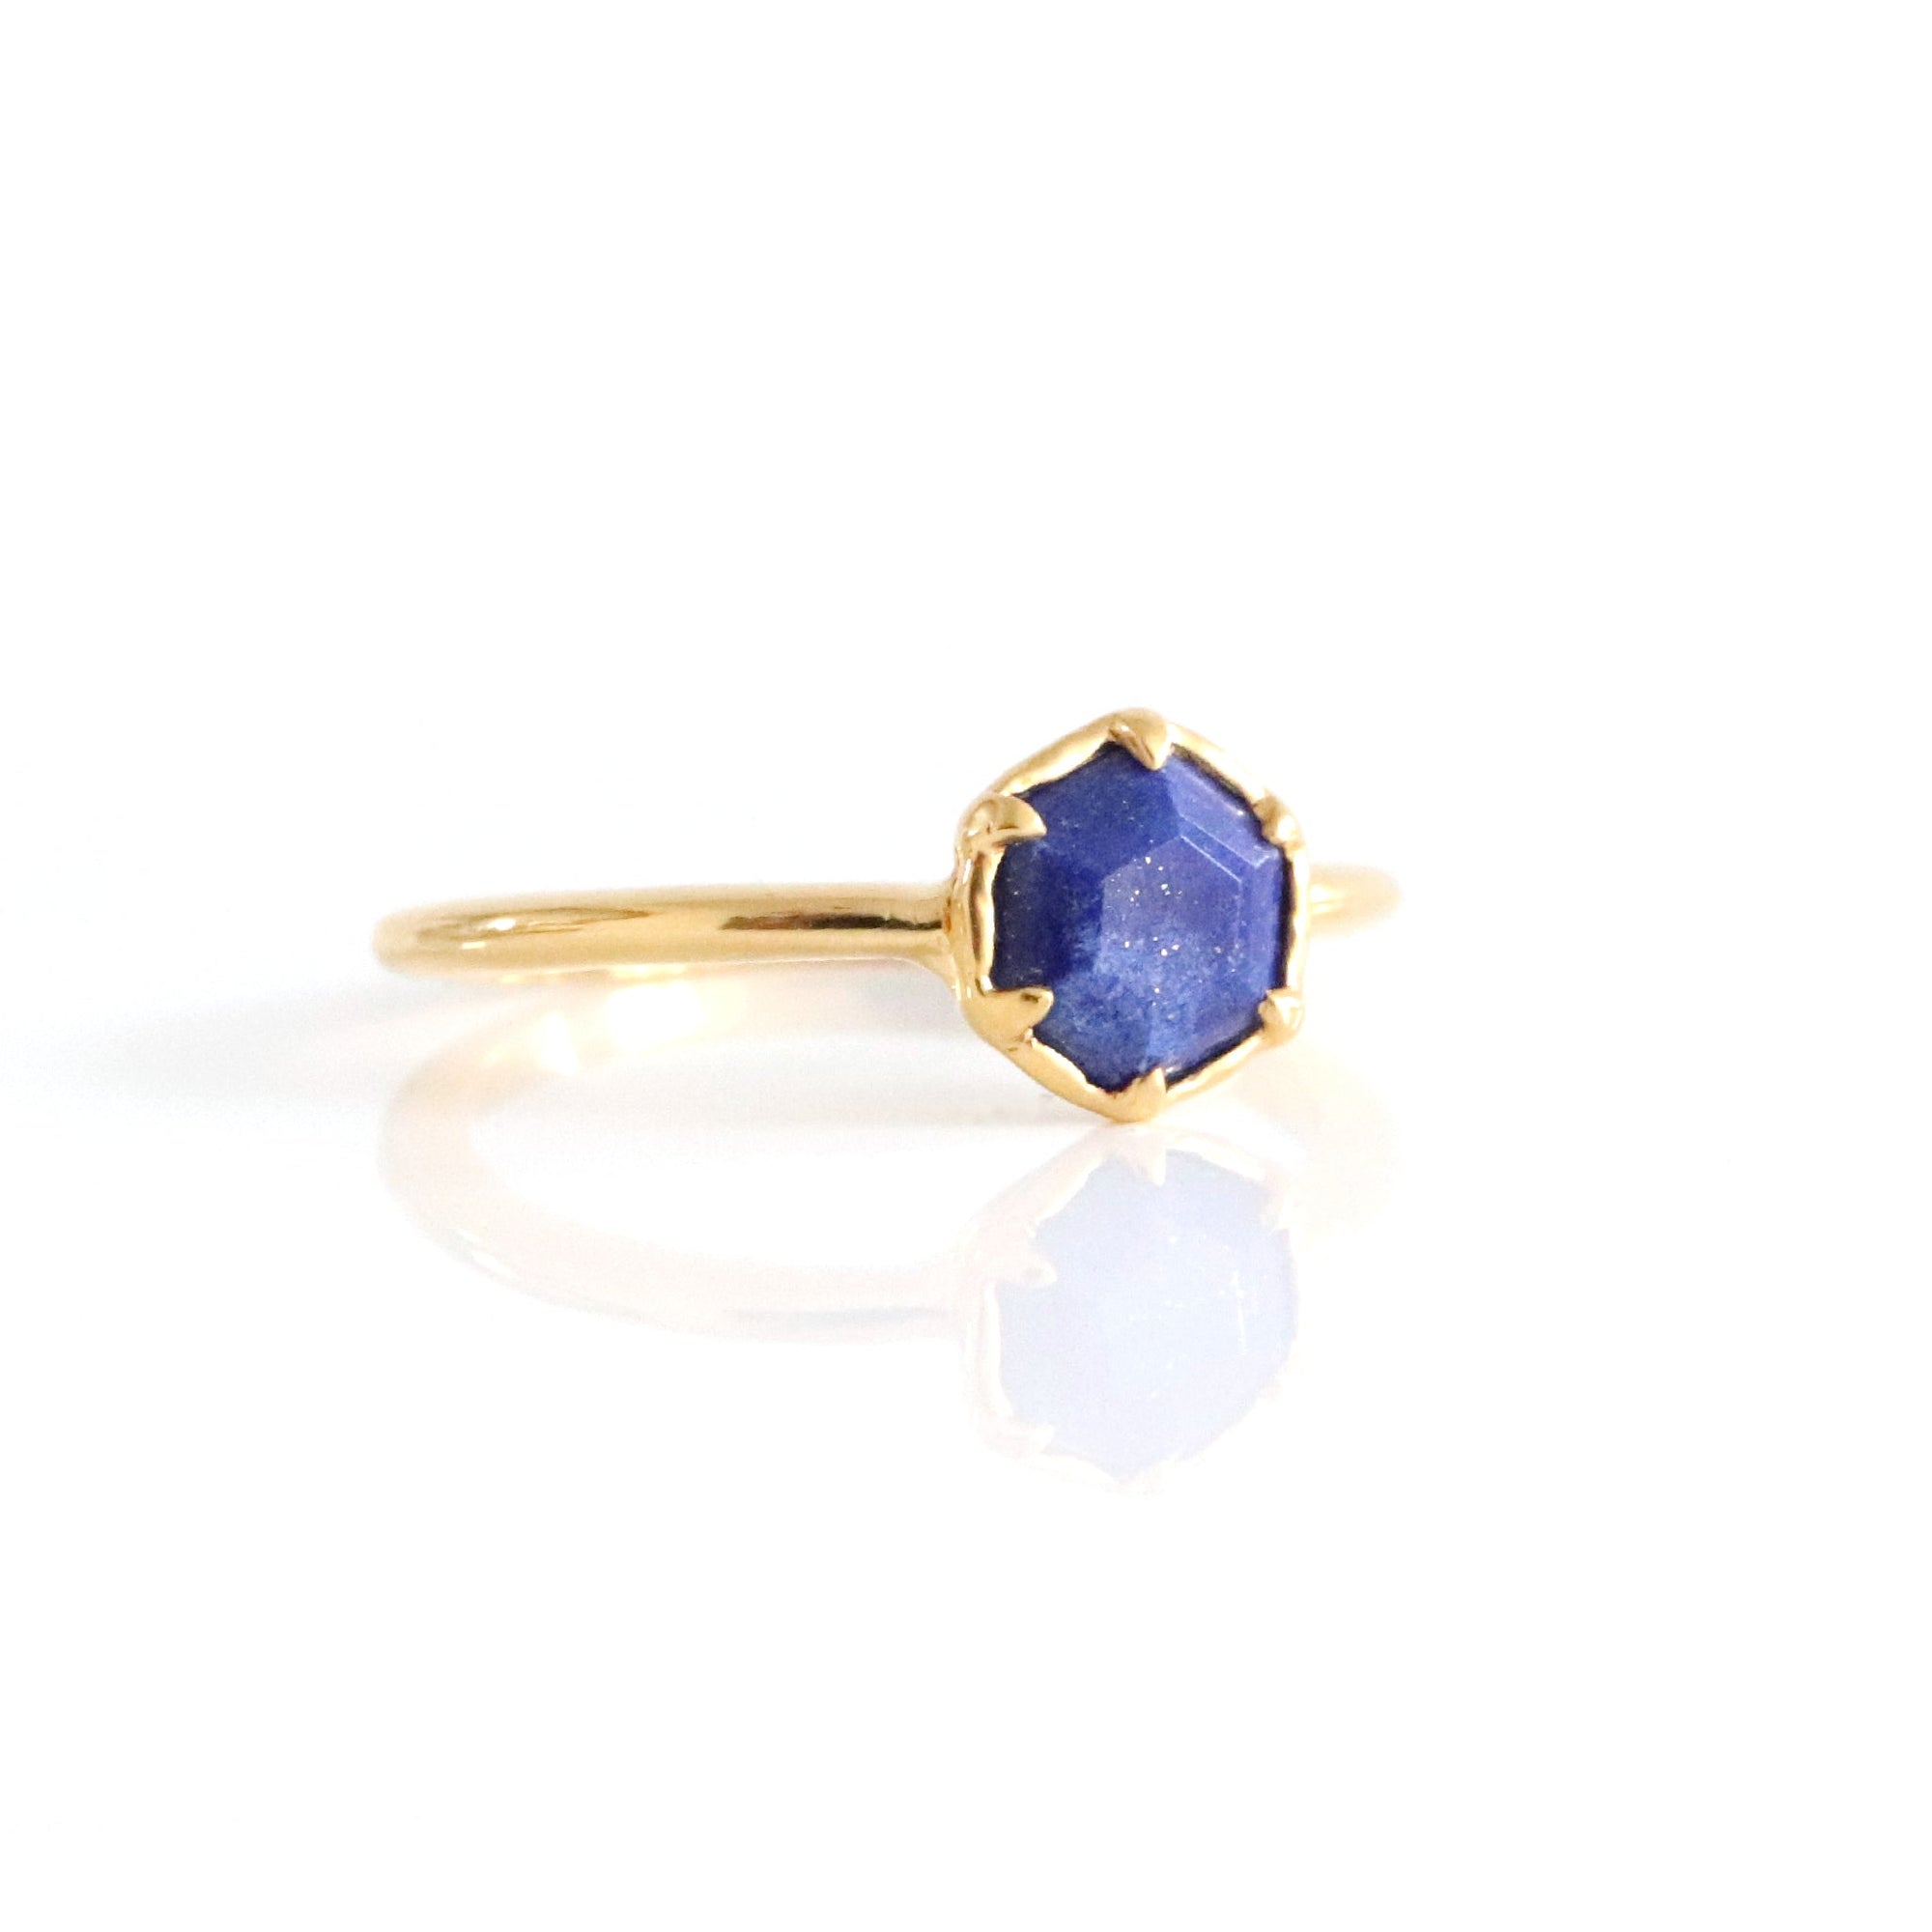 GRACE RING - LAPIS & GOLD - SO PRETTY CARA COTTER